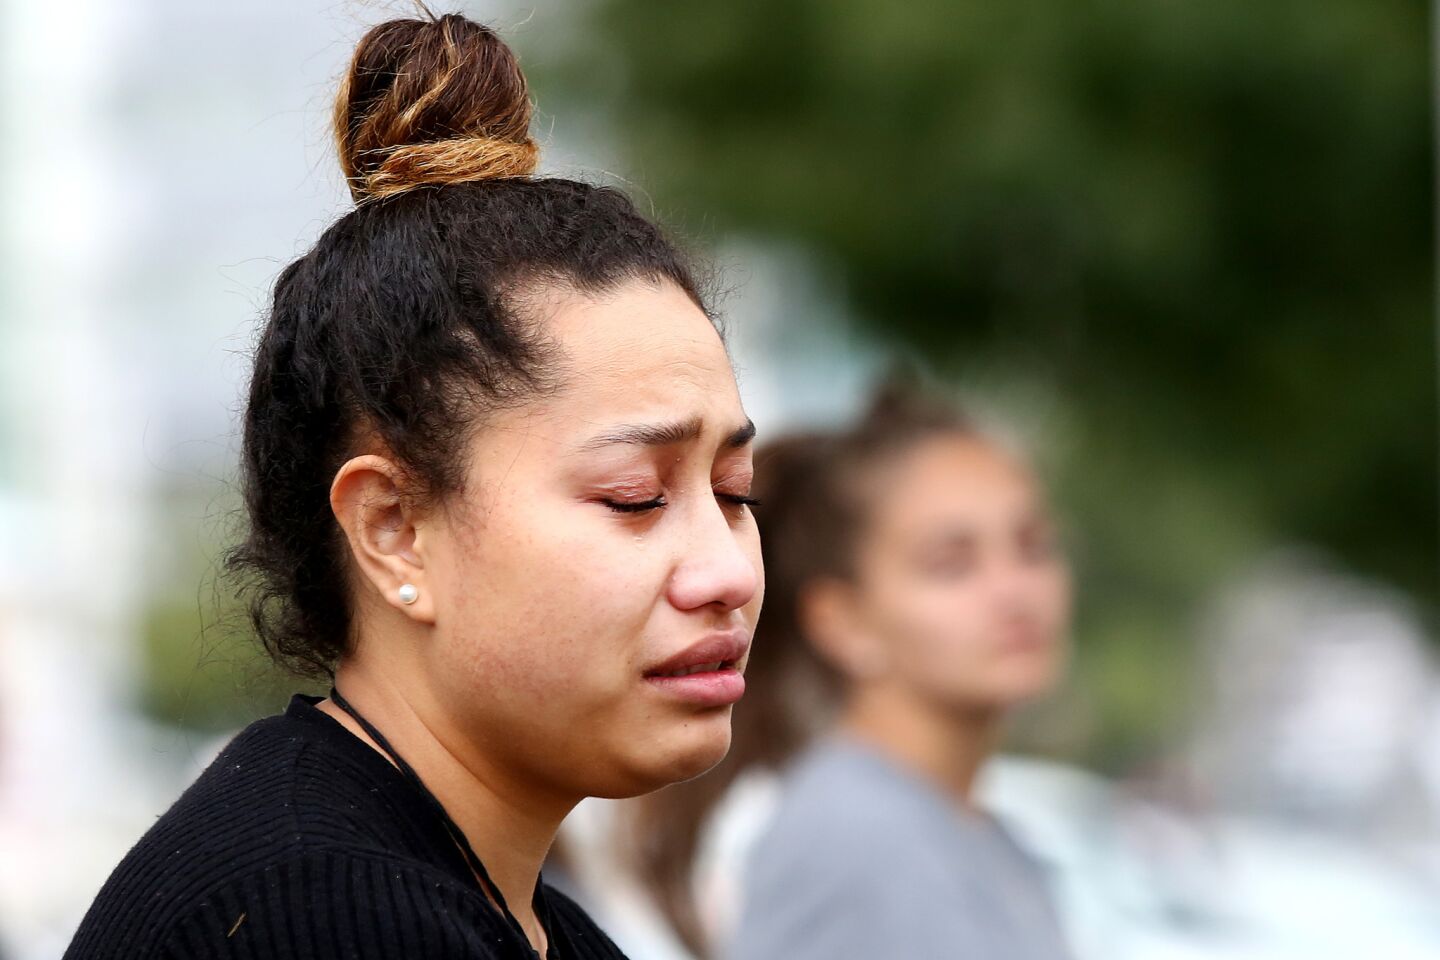 Residents of Dunedin, New Zealand, pay tribute to those killed and injured in Christchurch.